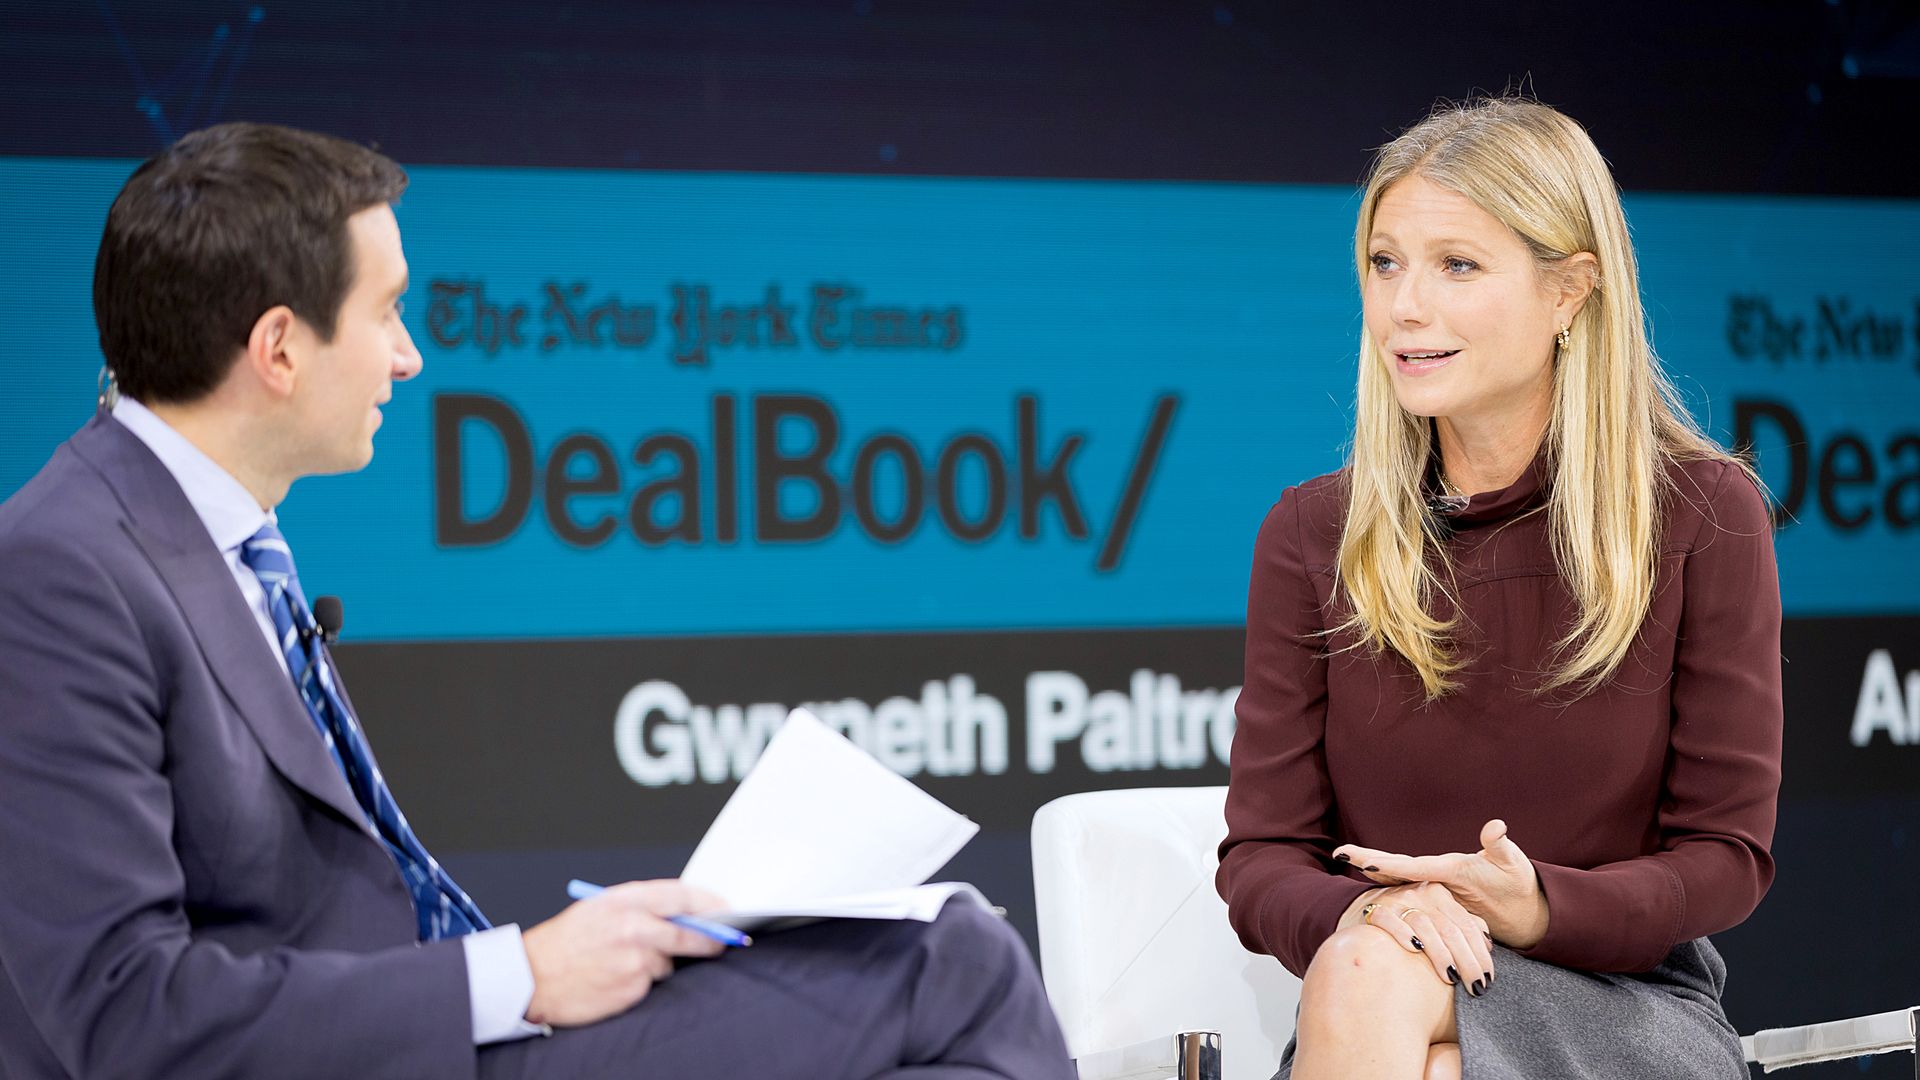 Gwyneth Paltrow, Founder and C.E.O., goop onstage at 2019 New York Times Dealbook on November 06, 2019 in New York City. (Photo by Mike Cohen/Getty Images for The New York Times)